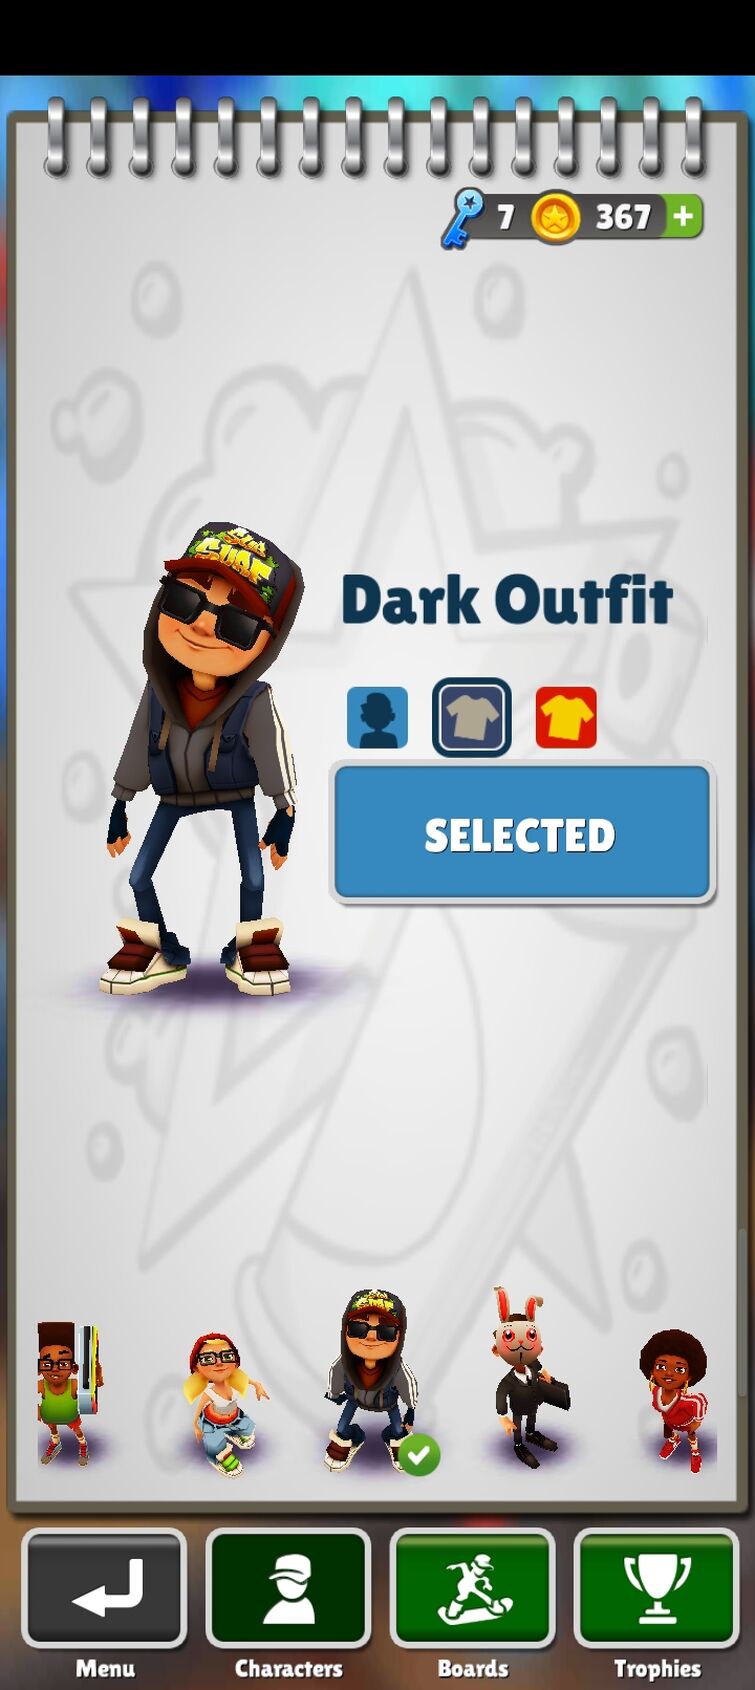 Gonna start subway surfers from Seoul 2014 and unlock everything until it  catches up to now.